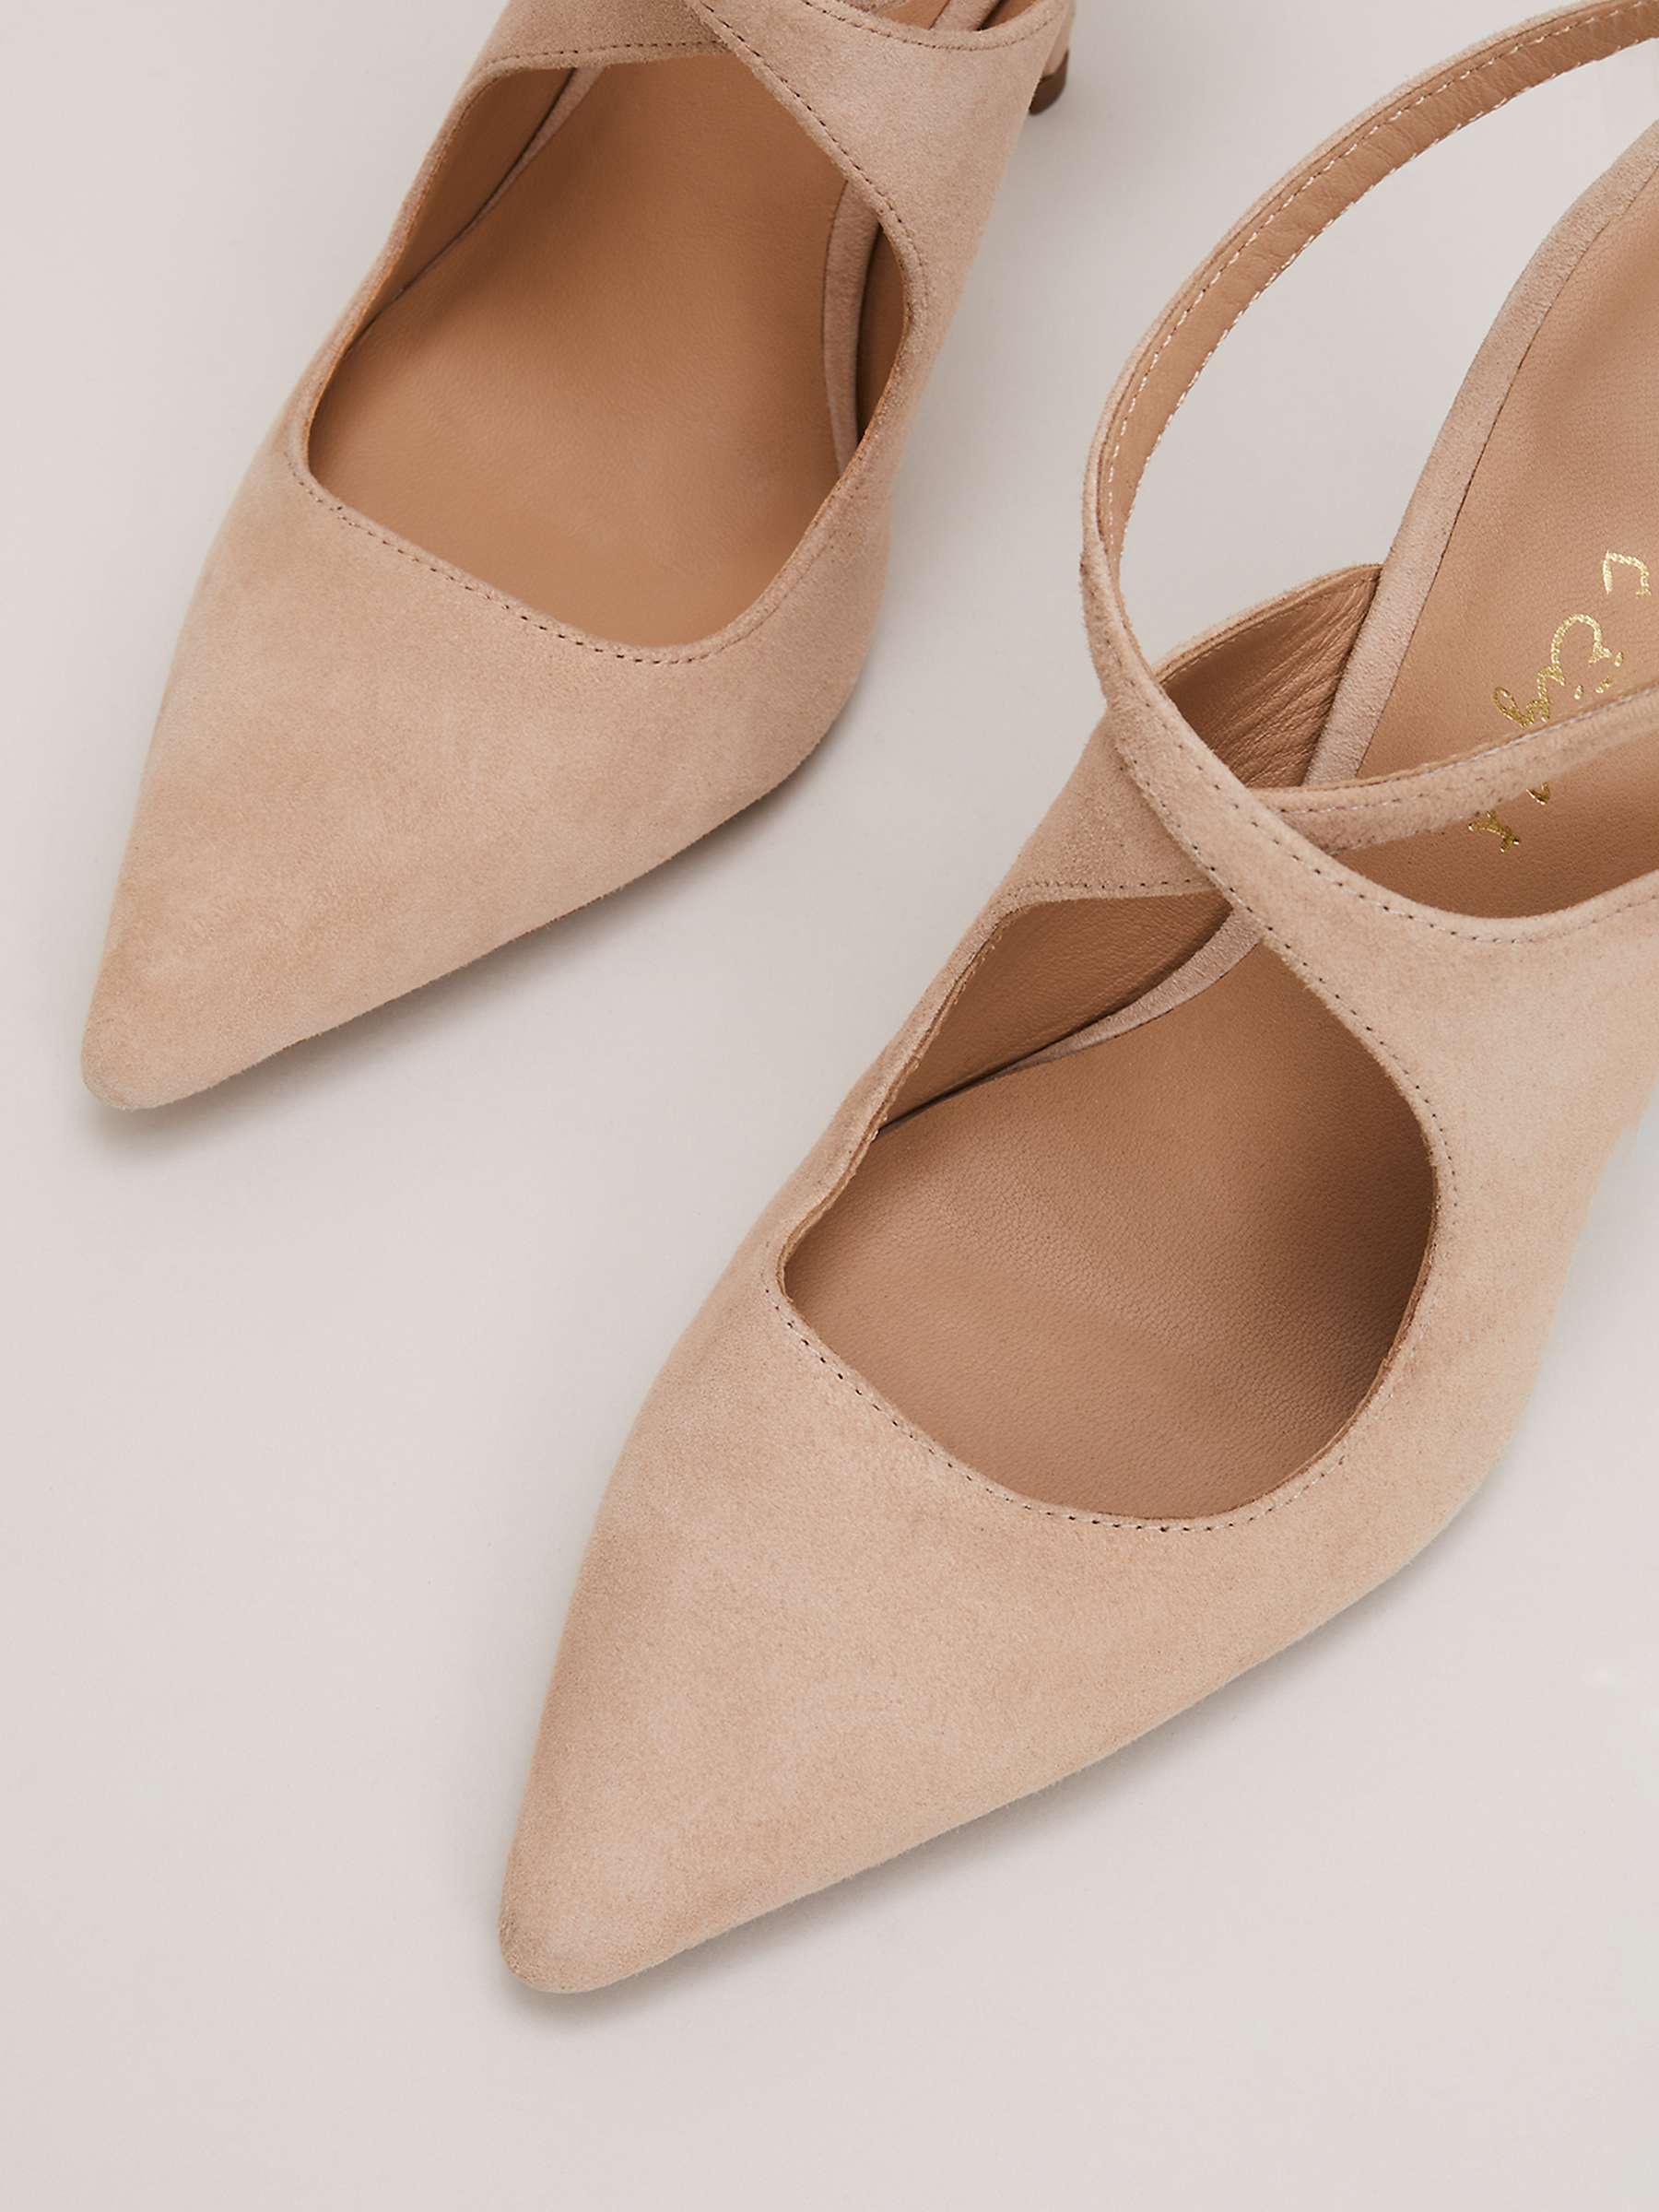 Buy Phase Eight Suede Cross Ankle Strap High Heel Shoes, Neutral Online at johnlewis.com